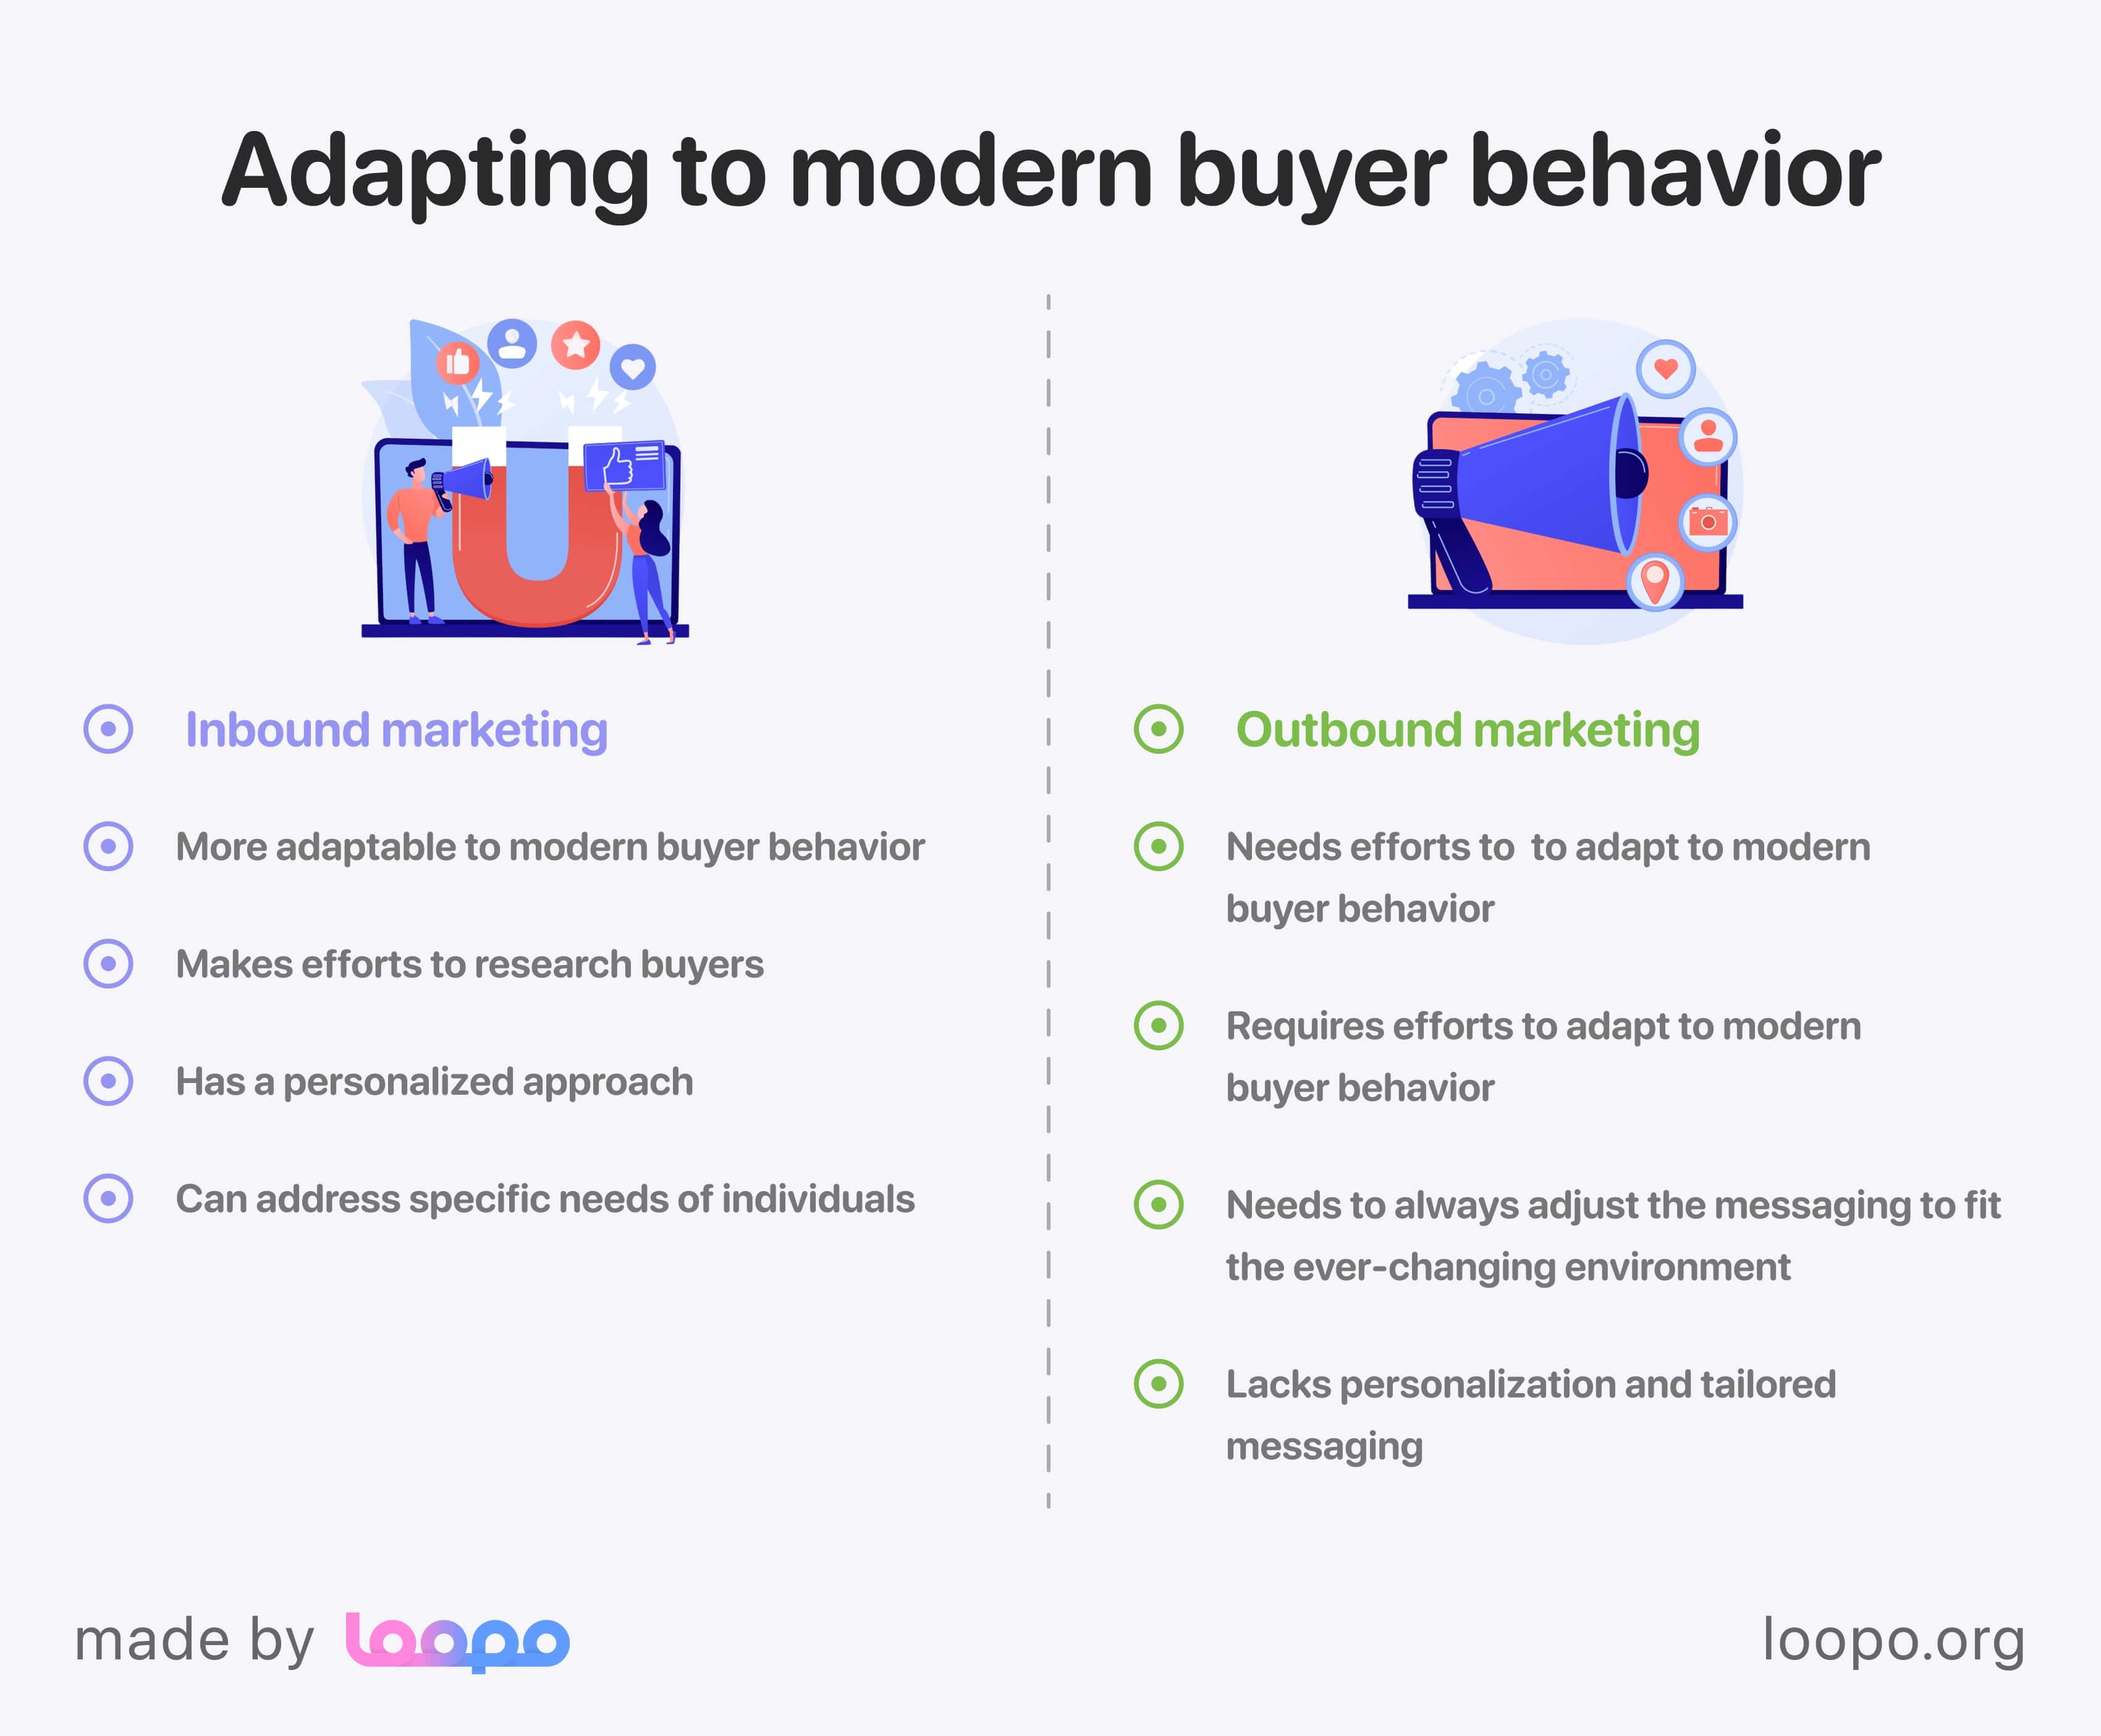 Inbound vs outbound in terms of adapting to modern buyer behavior